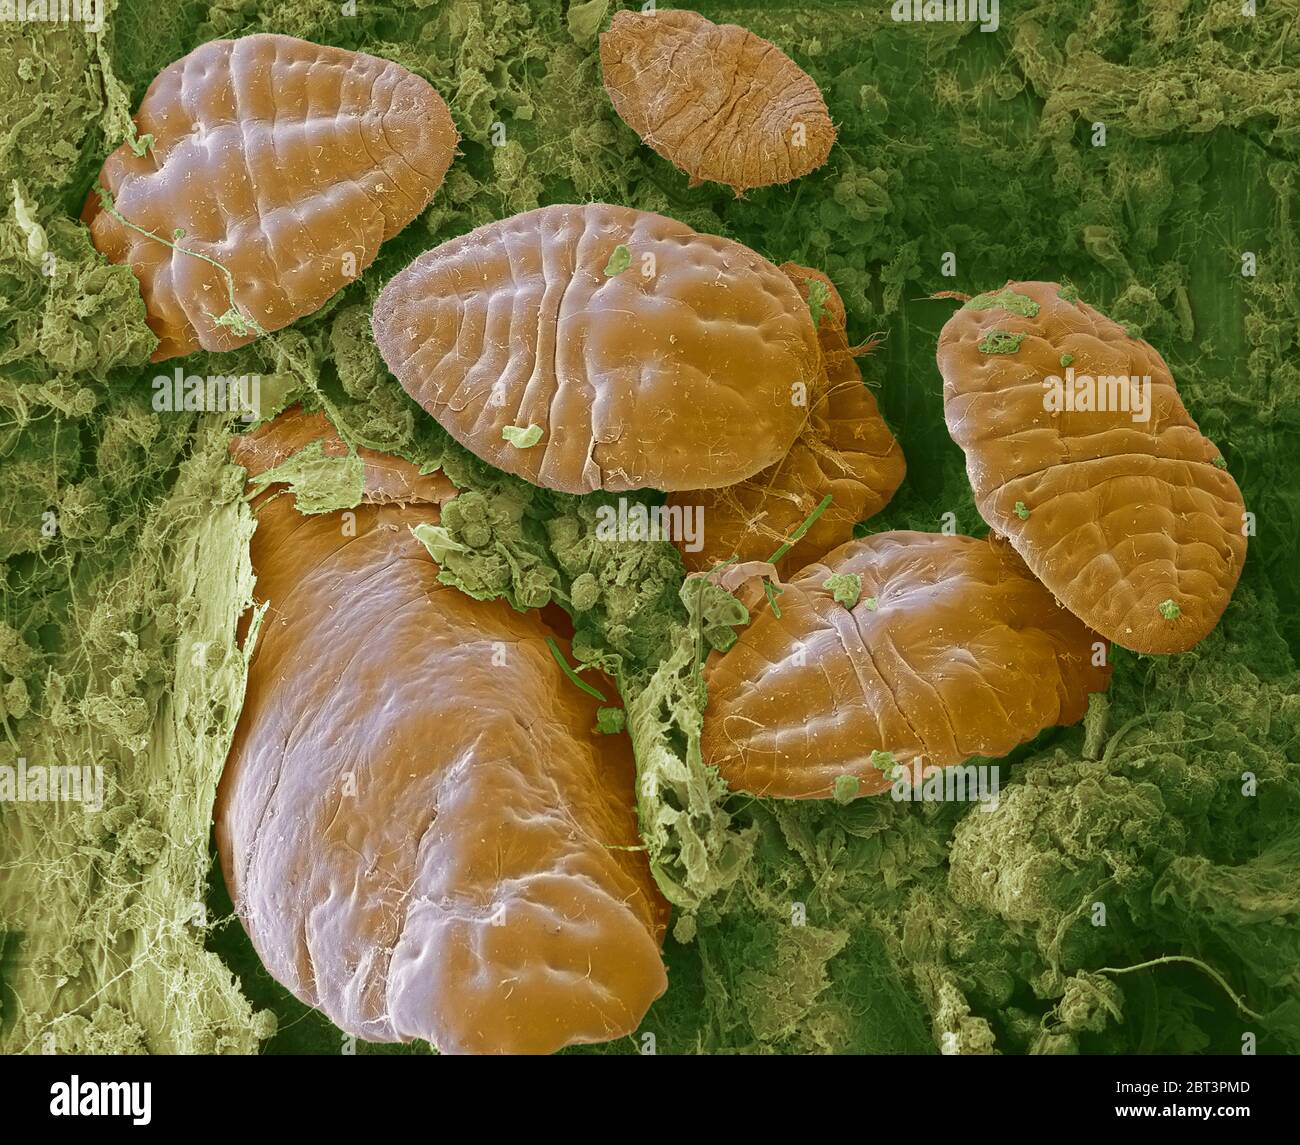 Scale insects. Coloured scanning electron micrograph (SEM) of scale insects (superfamily Coccoidea) on a leaf. This pest feeds on the plant's sap. It secretes a powdery wax coating that protects it against pesticides and predators. Magnification: x50 when printed at 10 centimetres wide. Stock Photo